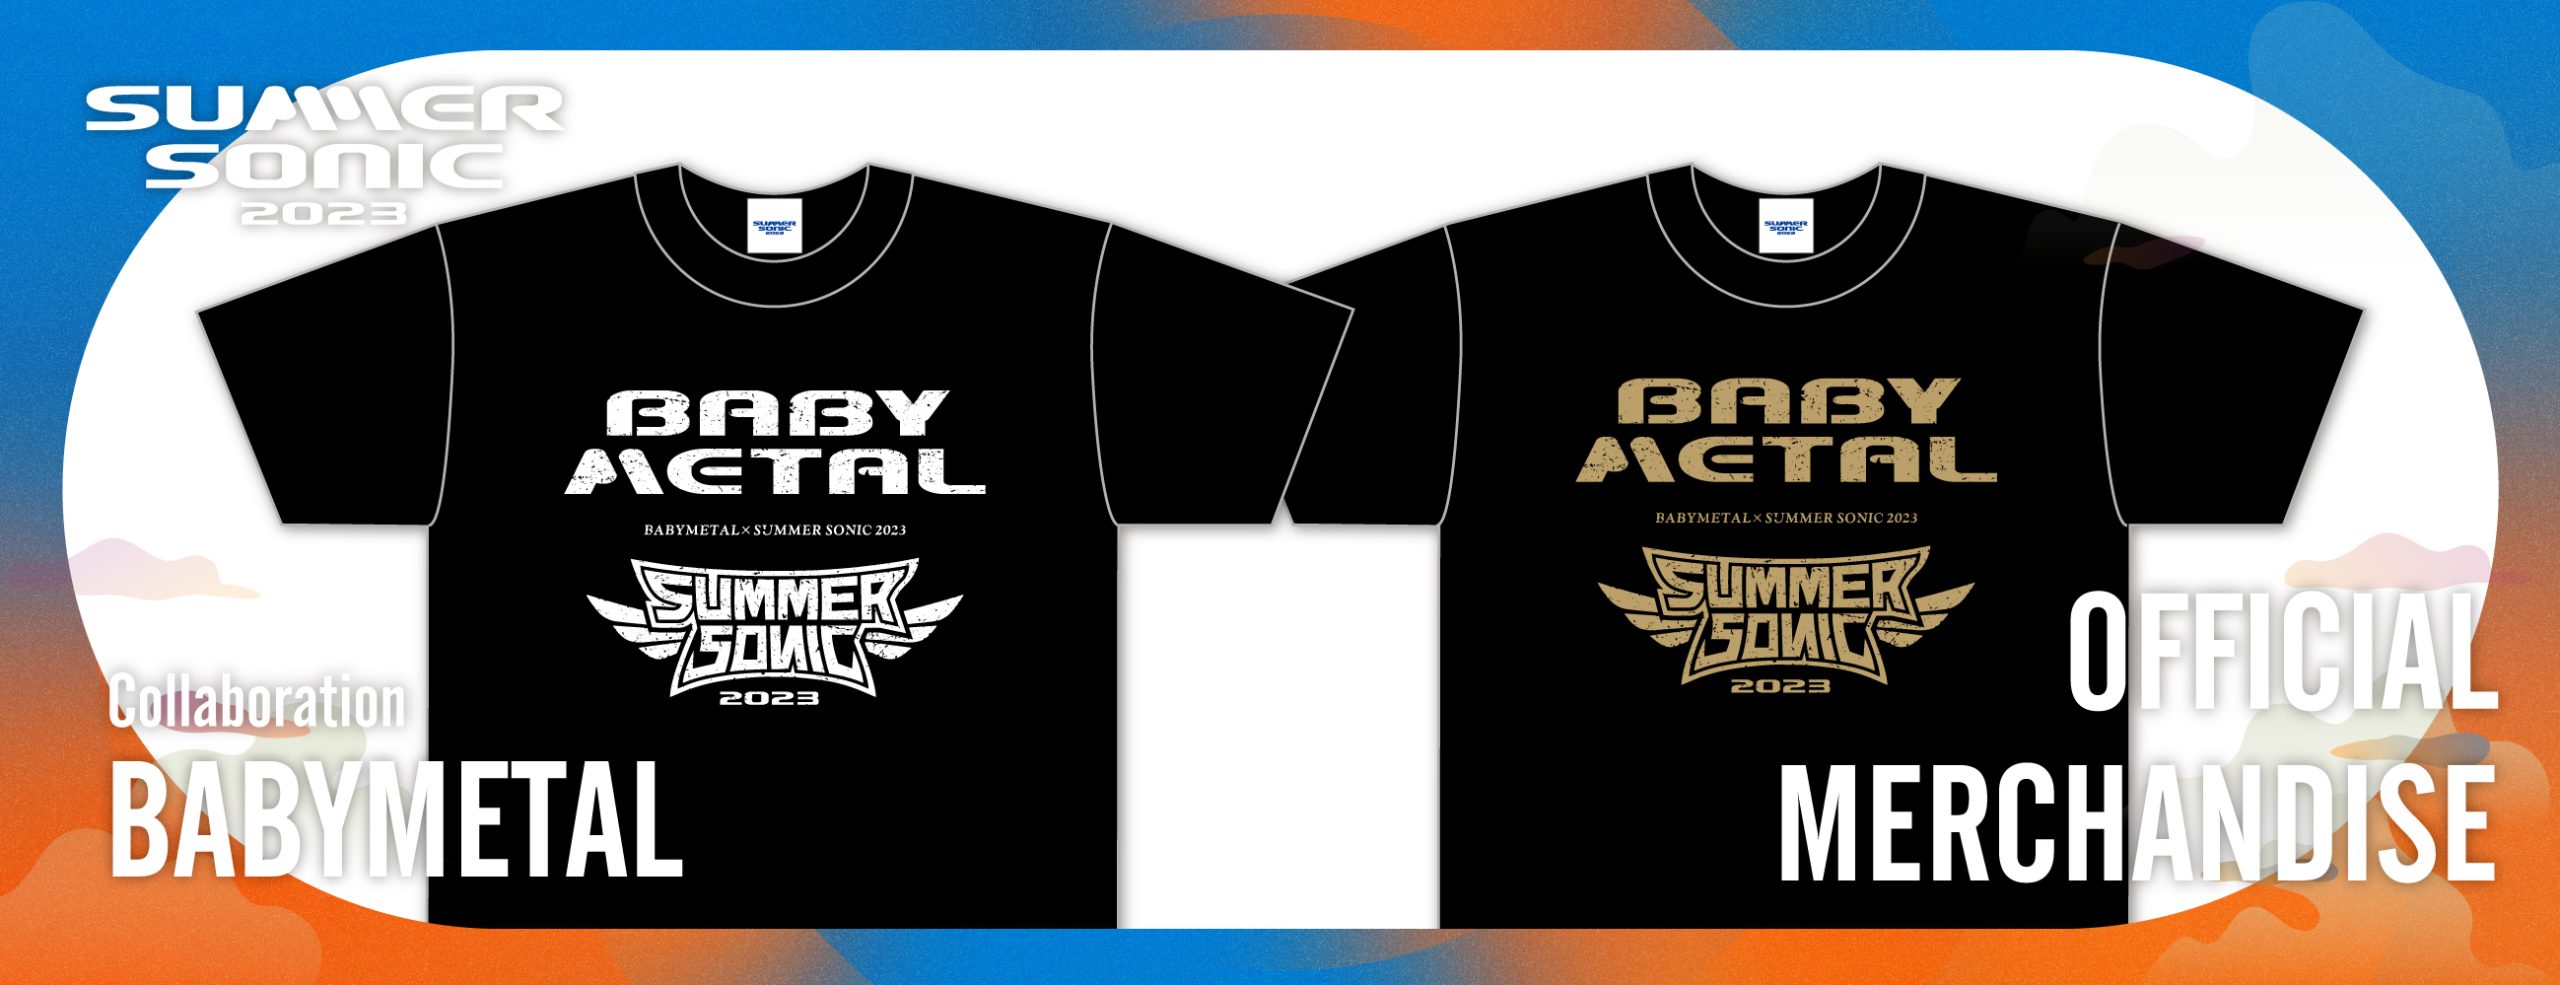 GOODS | SUMMER SONIC 2023 Official Site